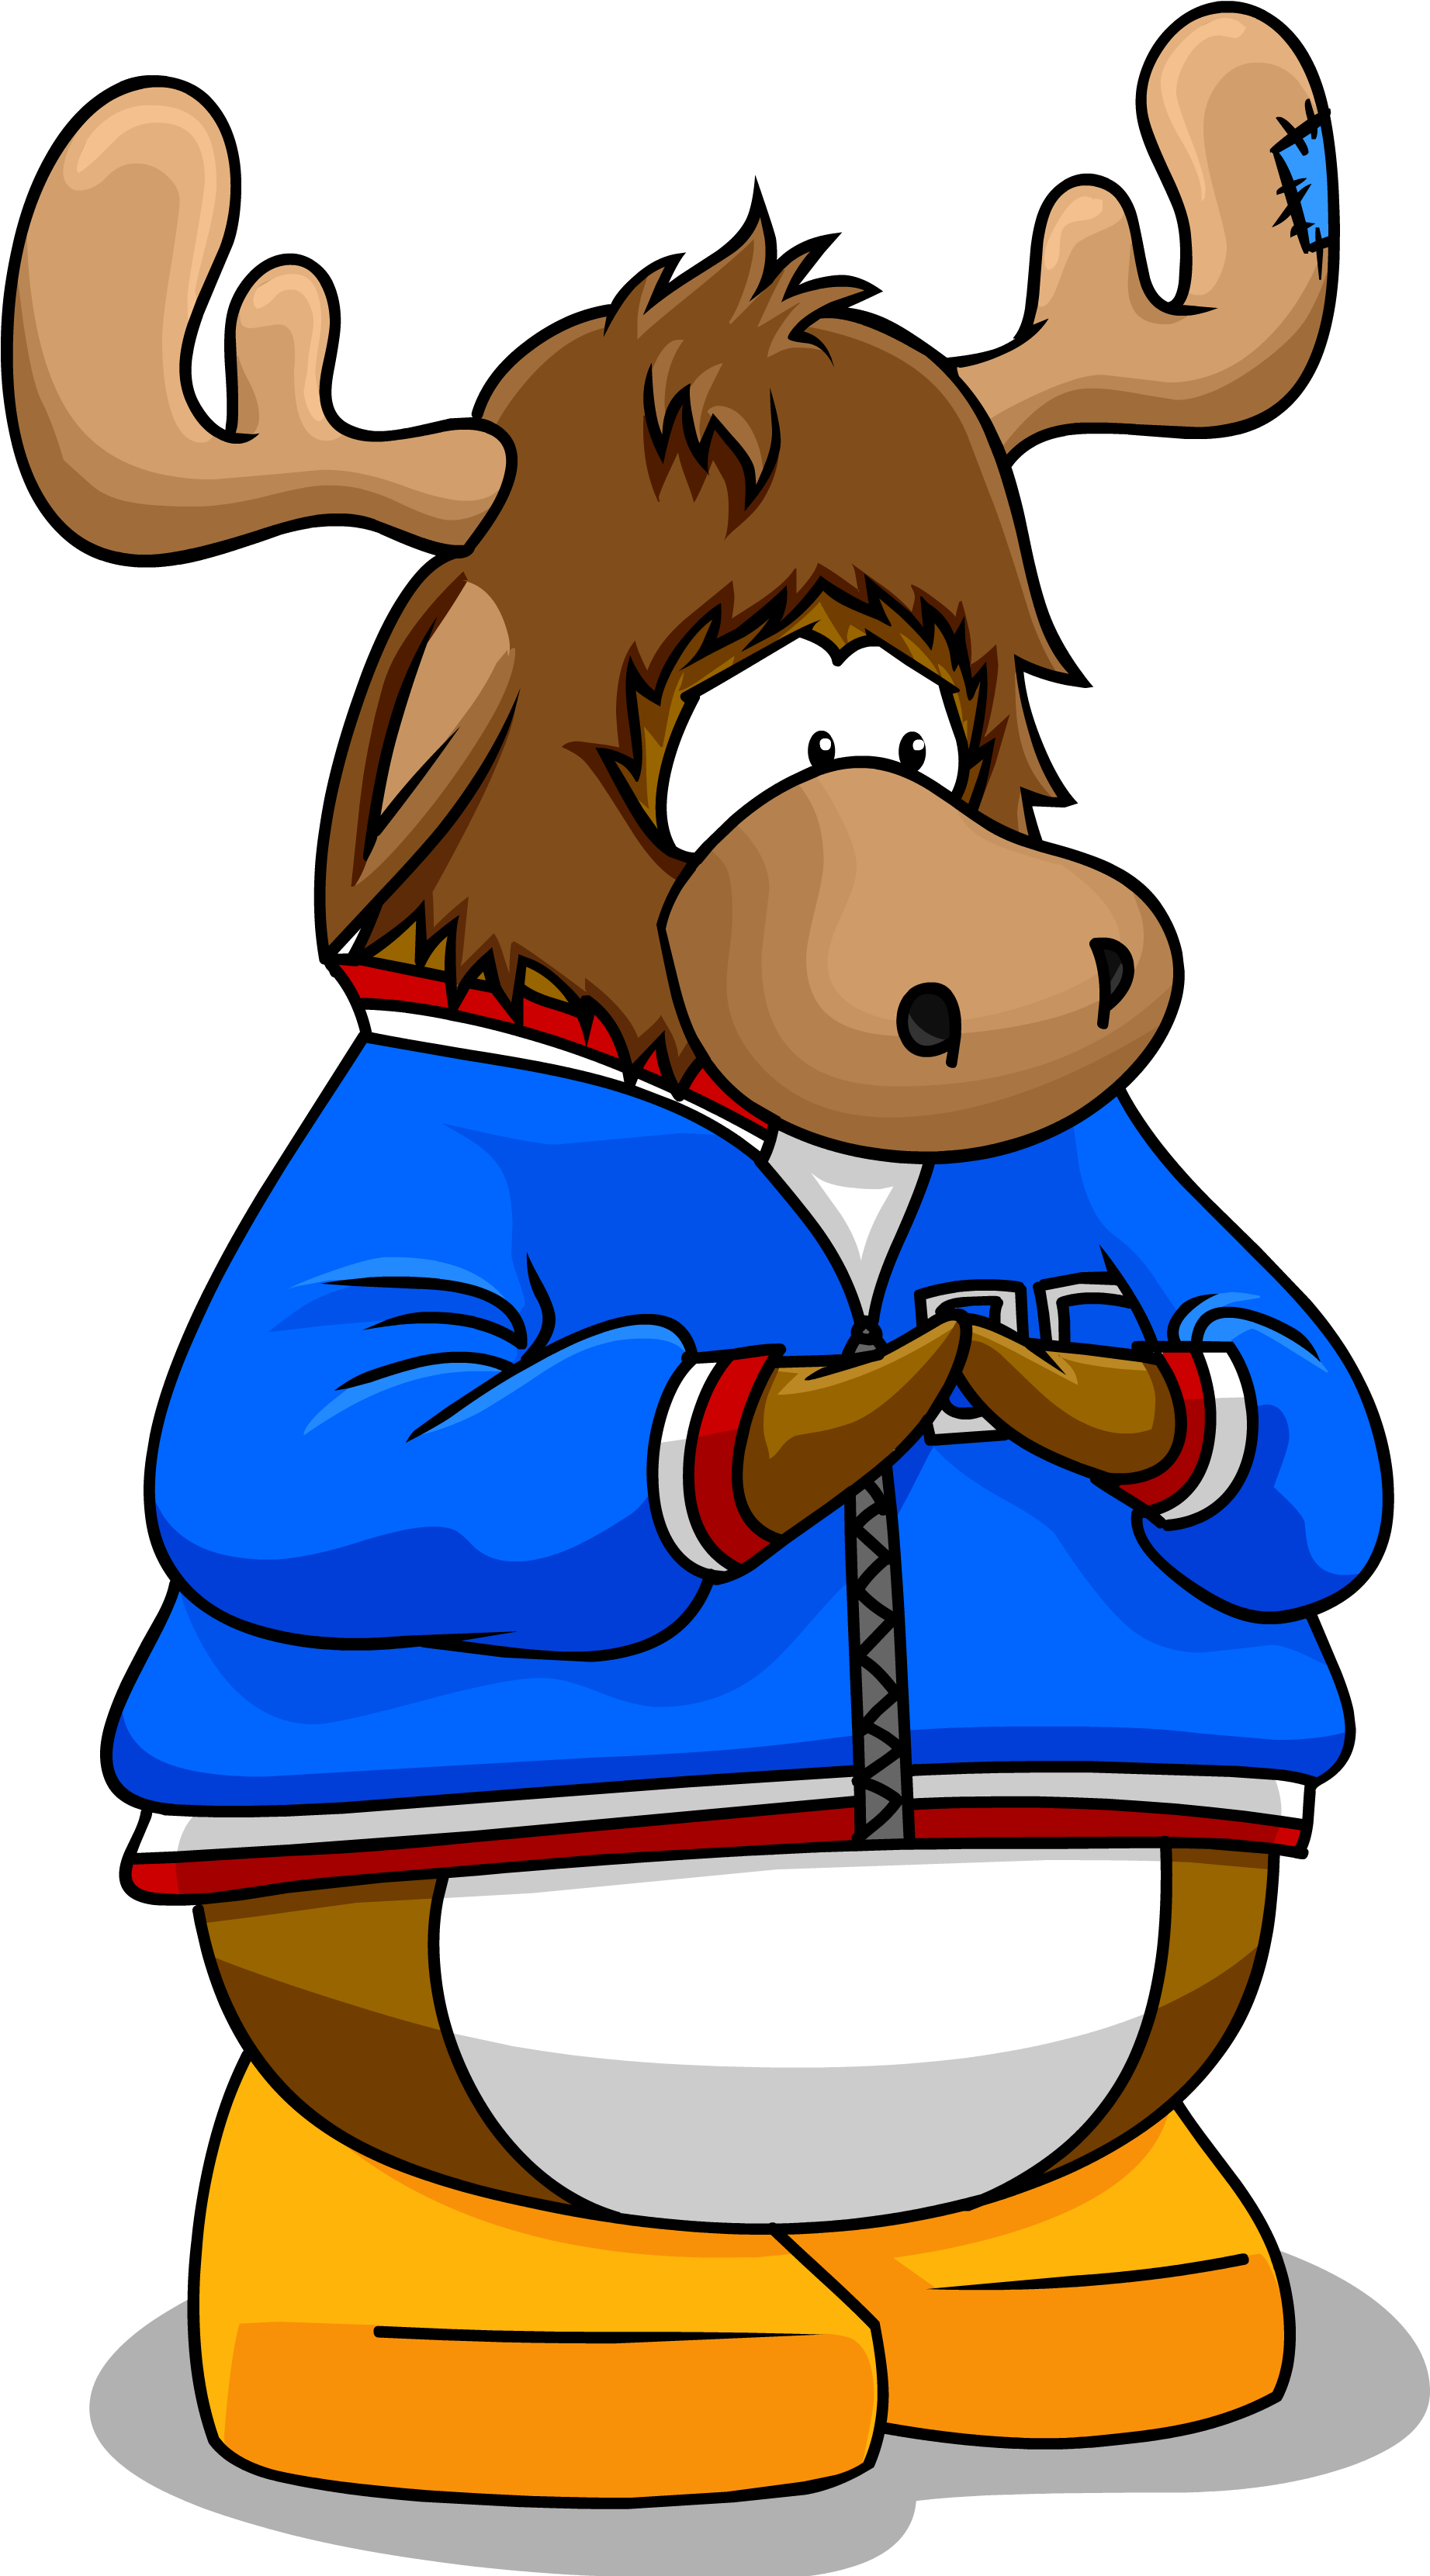 Png Royalty Free Stock Image The Moose Png Club Penguin - Club Penguin Team Red Or Team Blue (1861x3320)